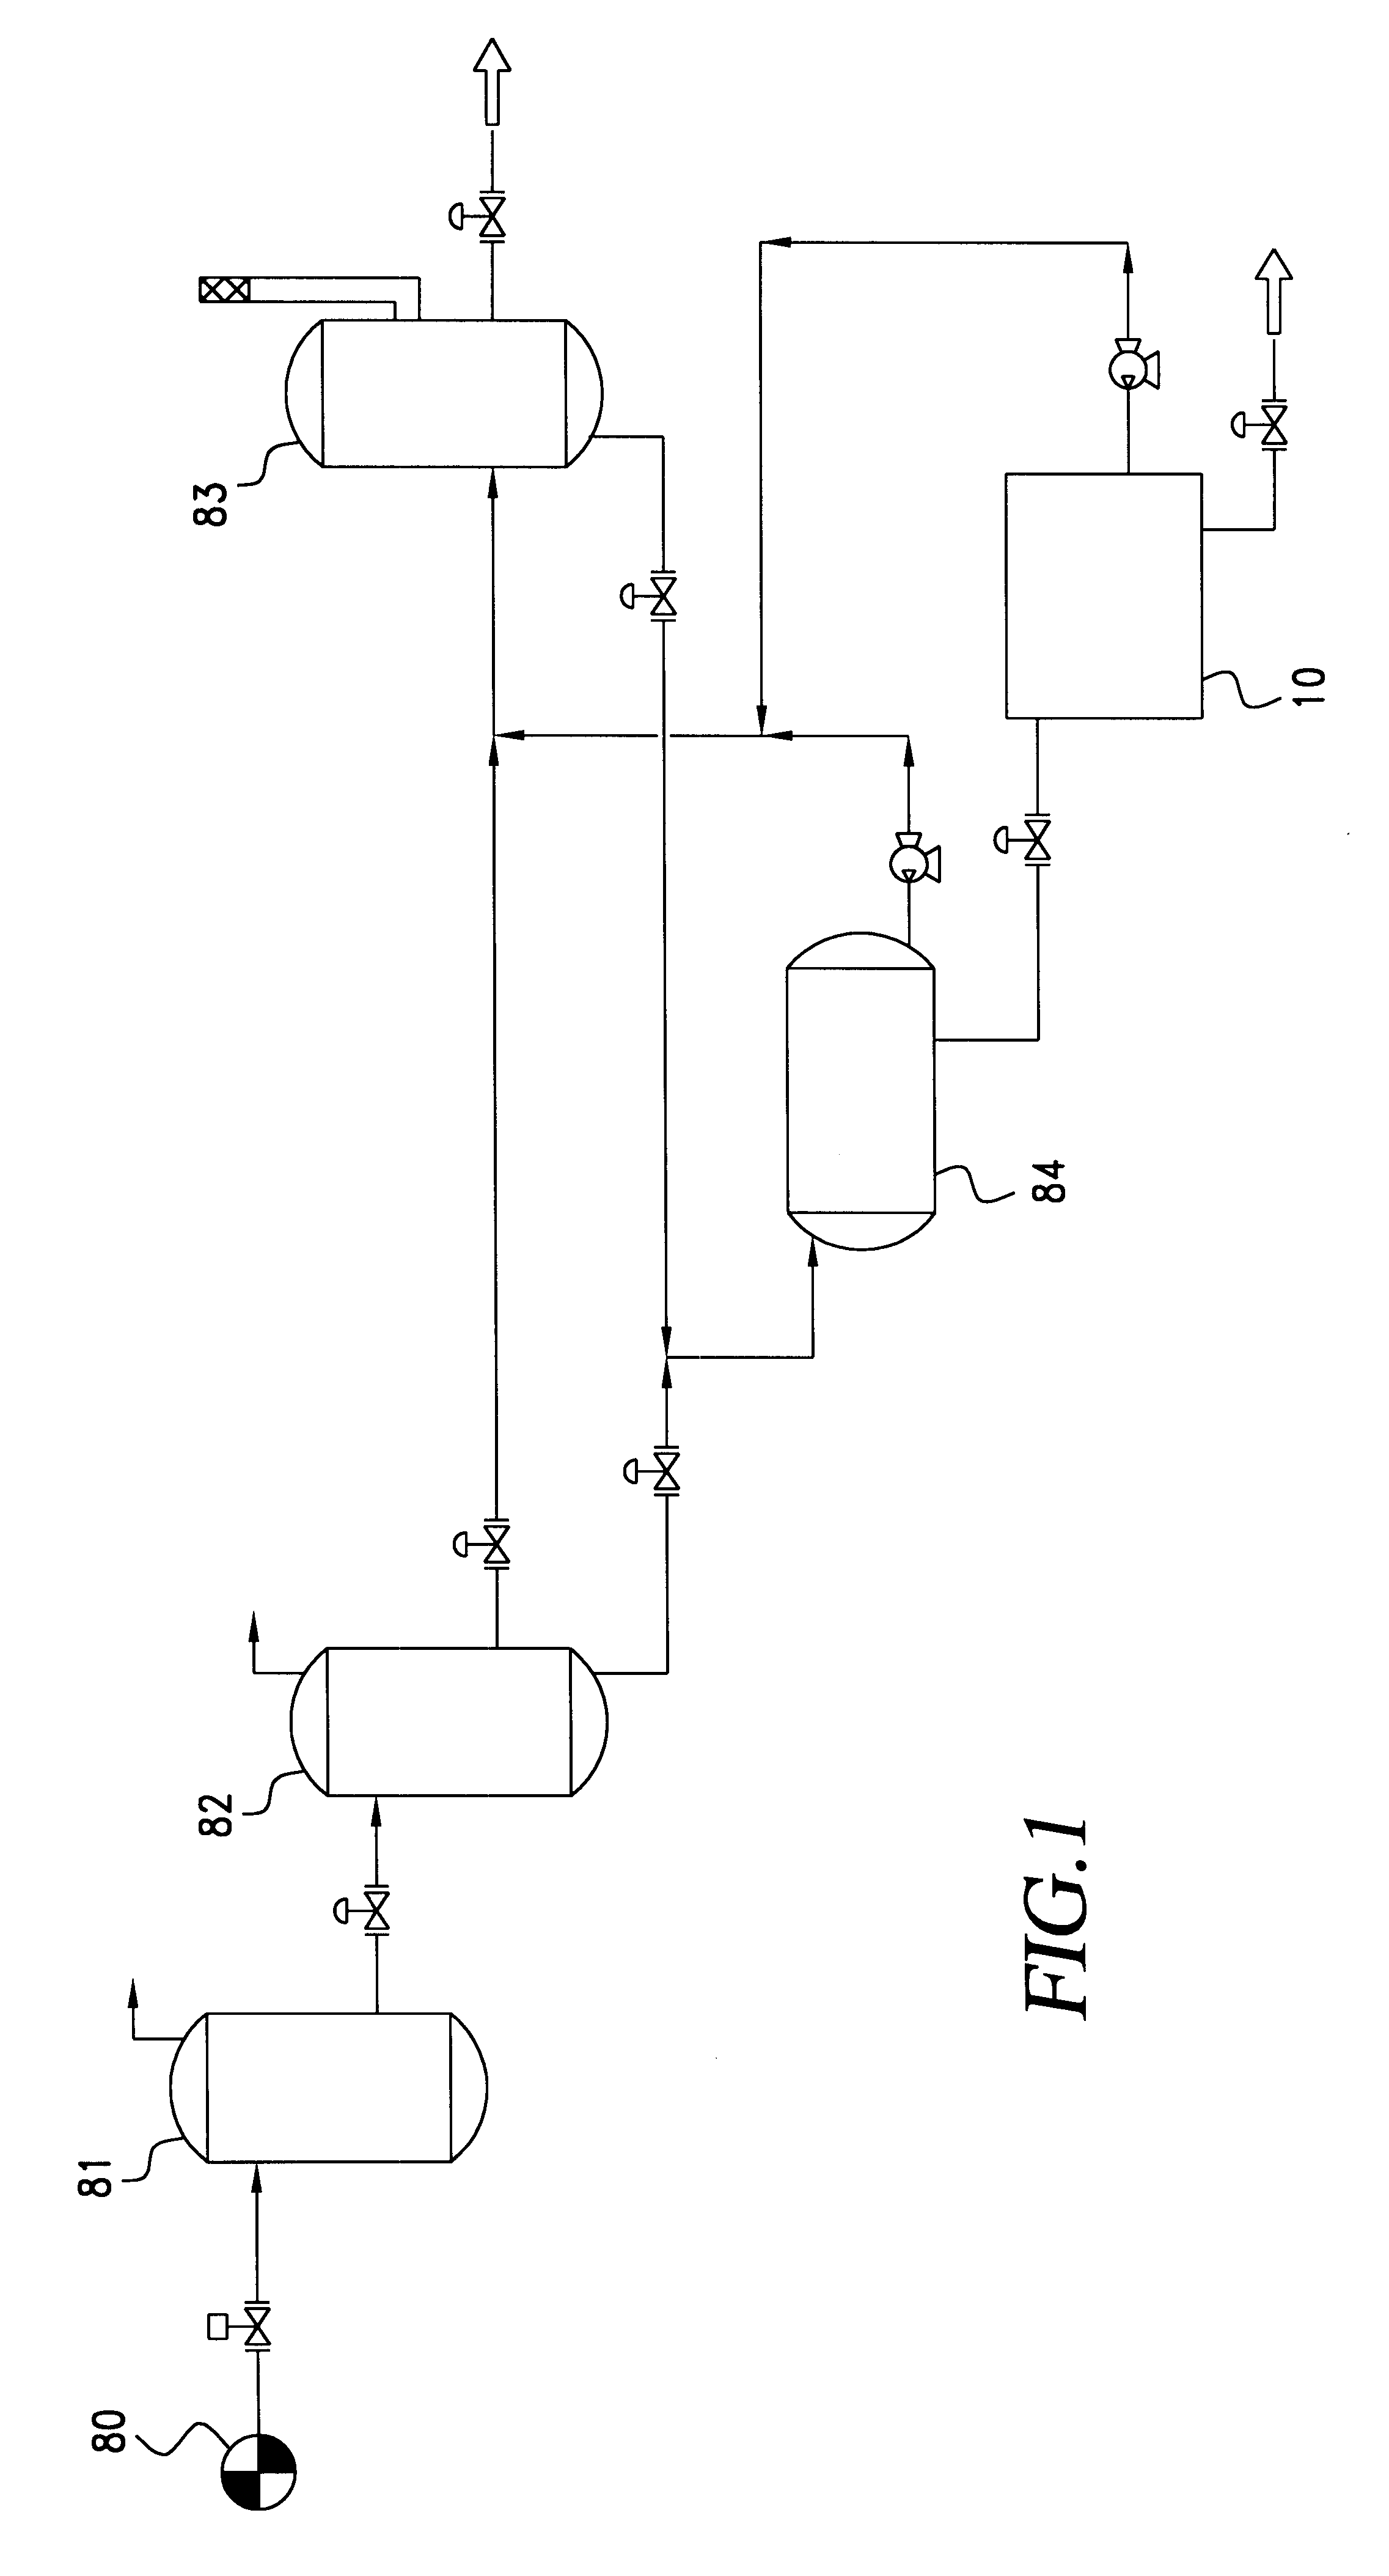 Flotation apparatus for clarifying produced water